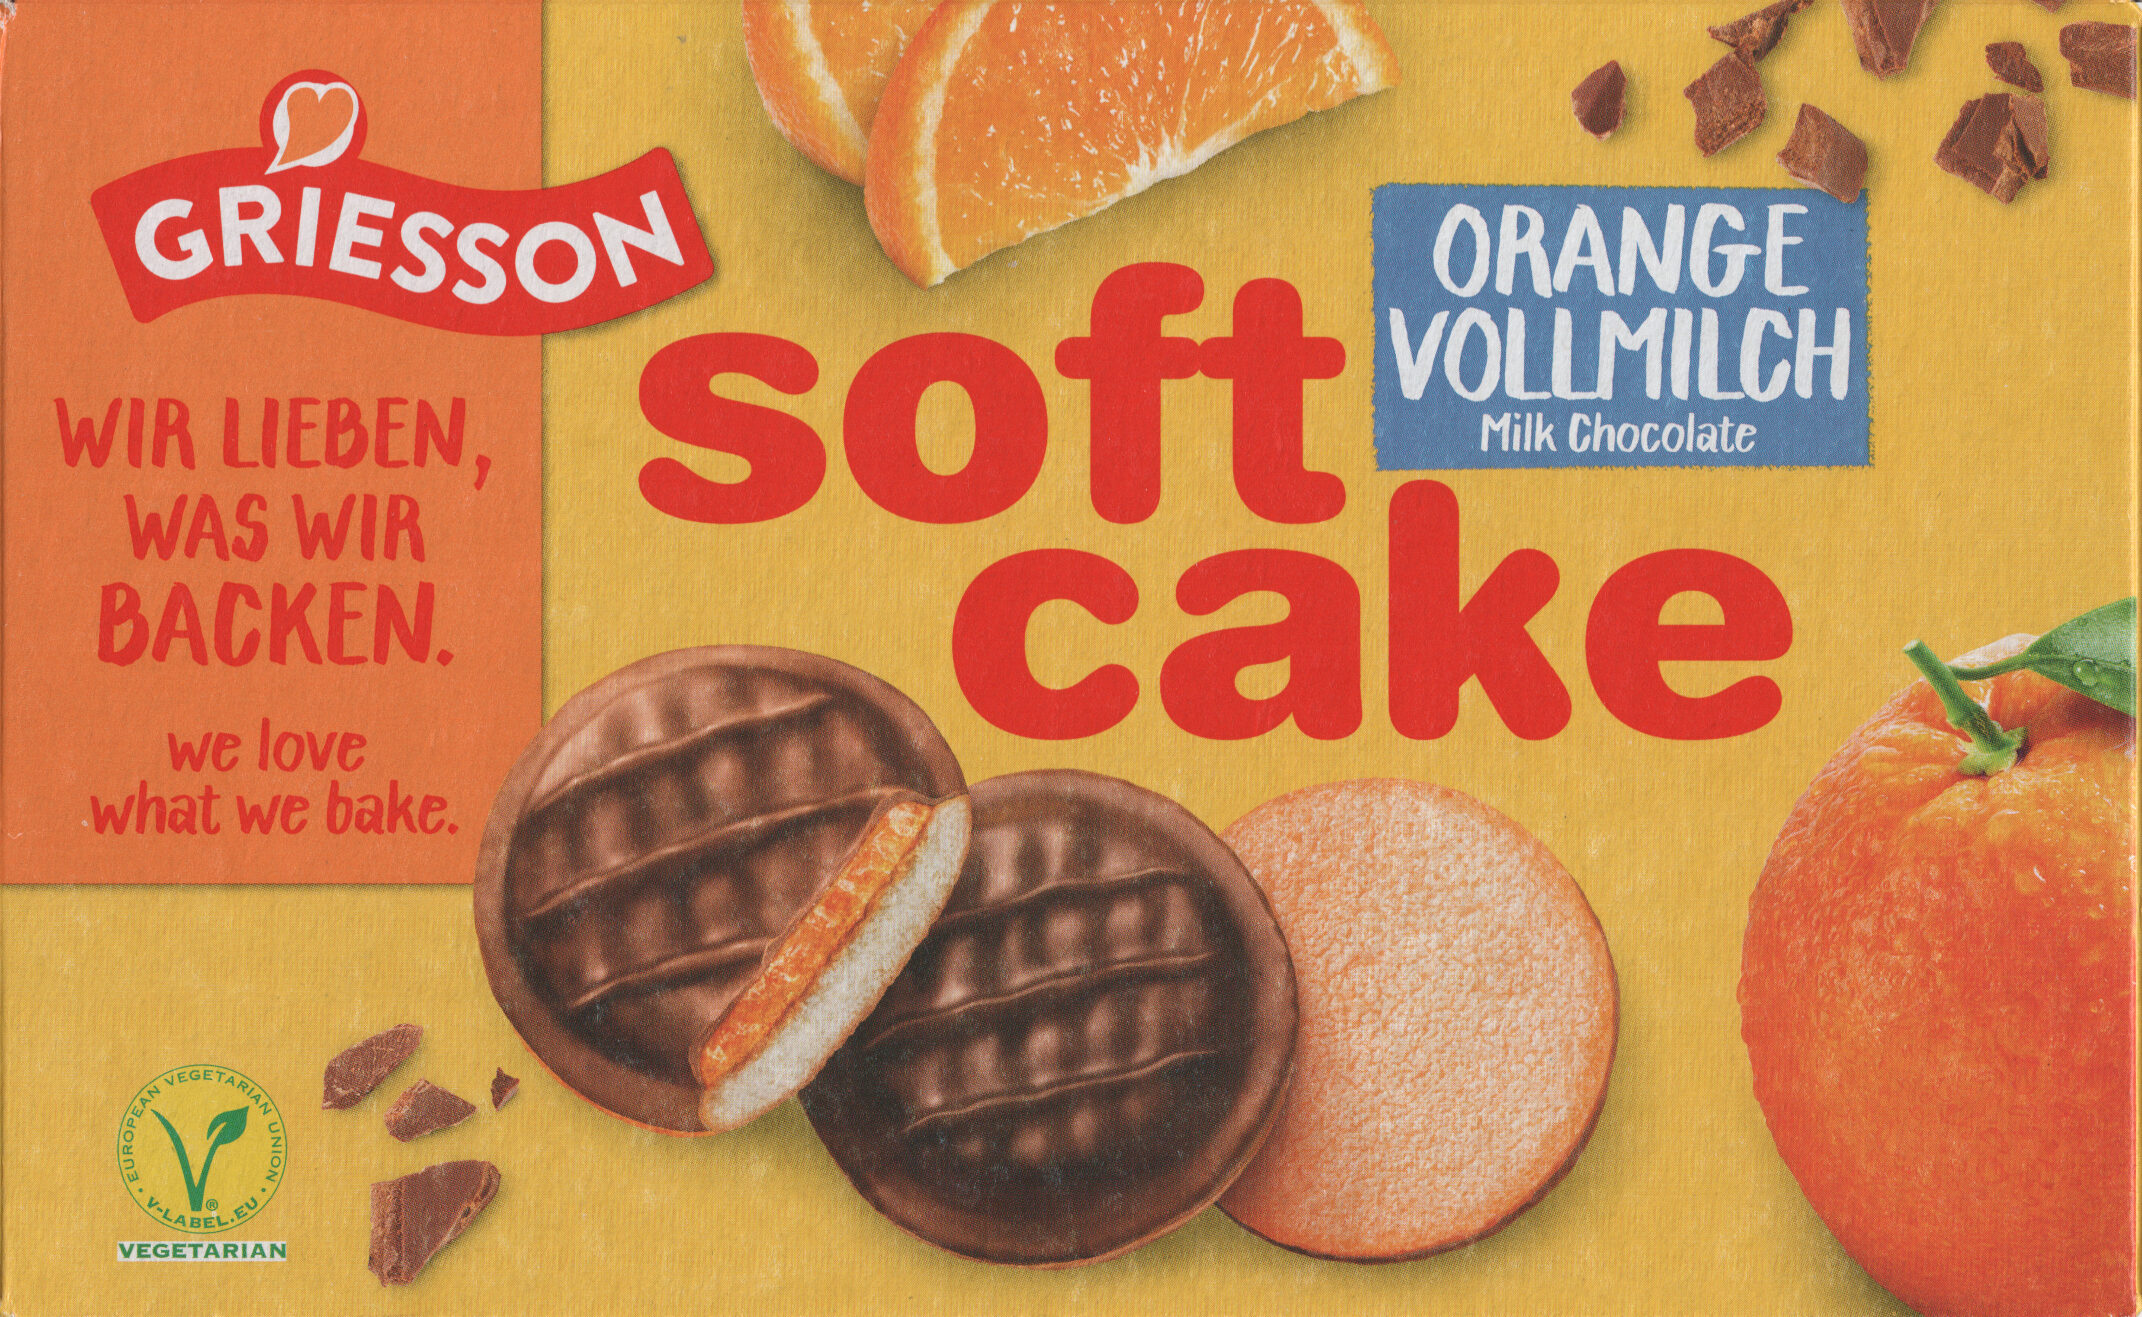 Soft Cake Orange Vollmilch - Product